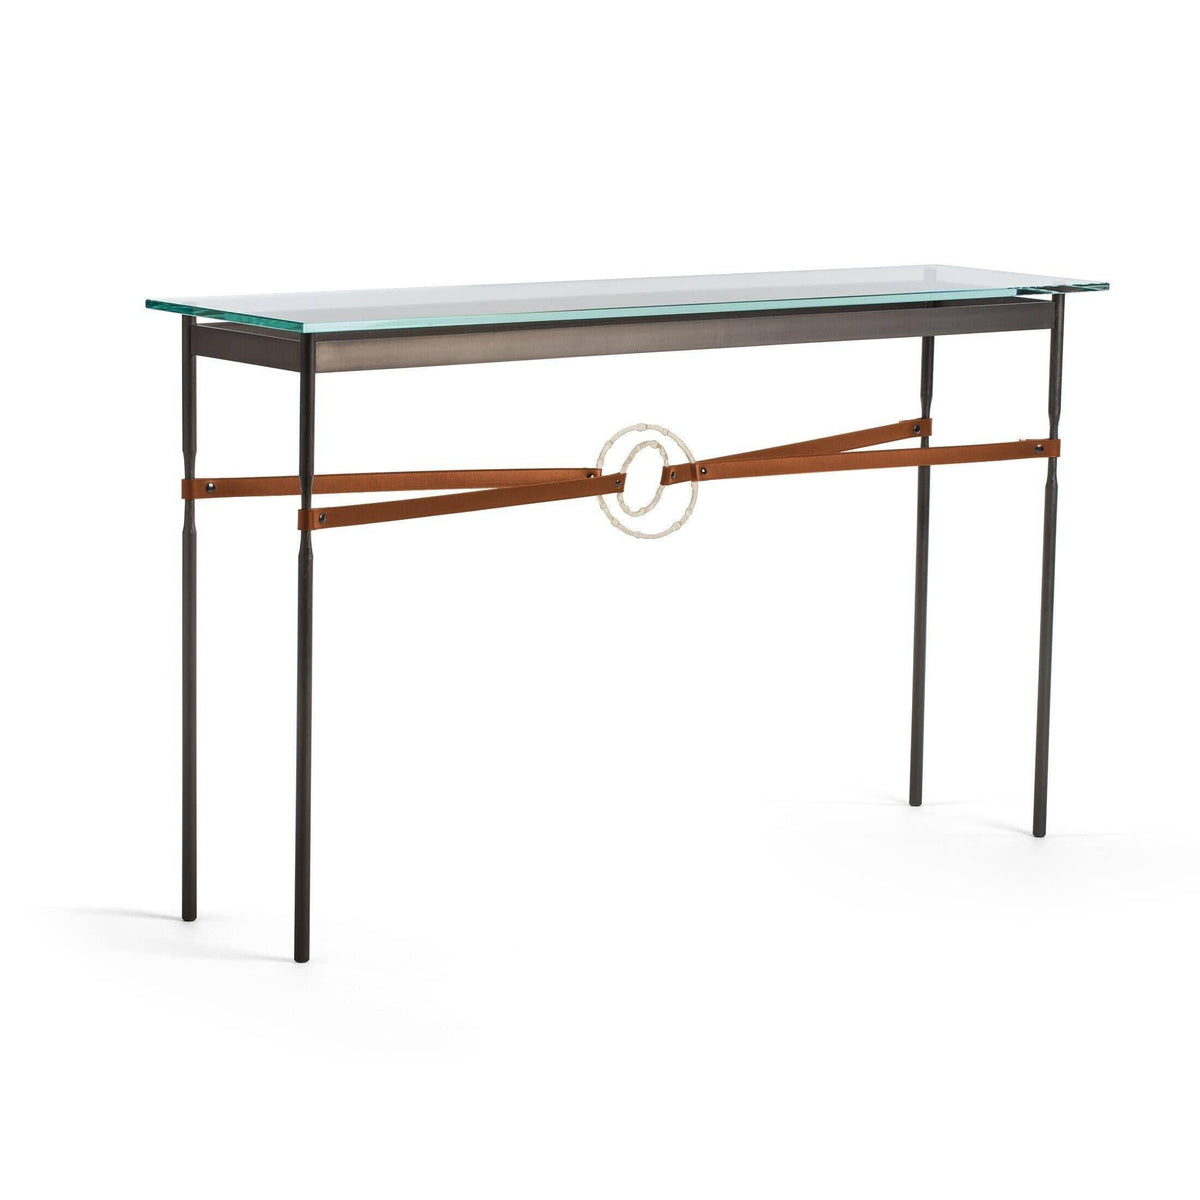 Hubbardton Forge - Equus Chestnut Leather Console Table - 750118-07-84-LC-VA0714 | Montreal Lighting & Hardware